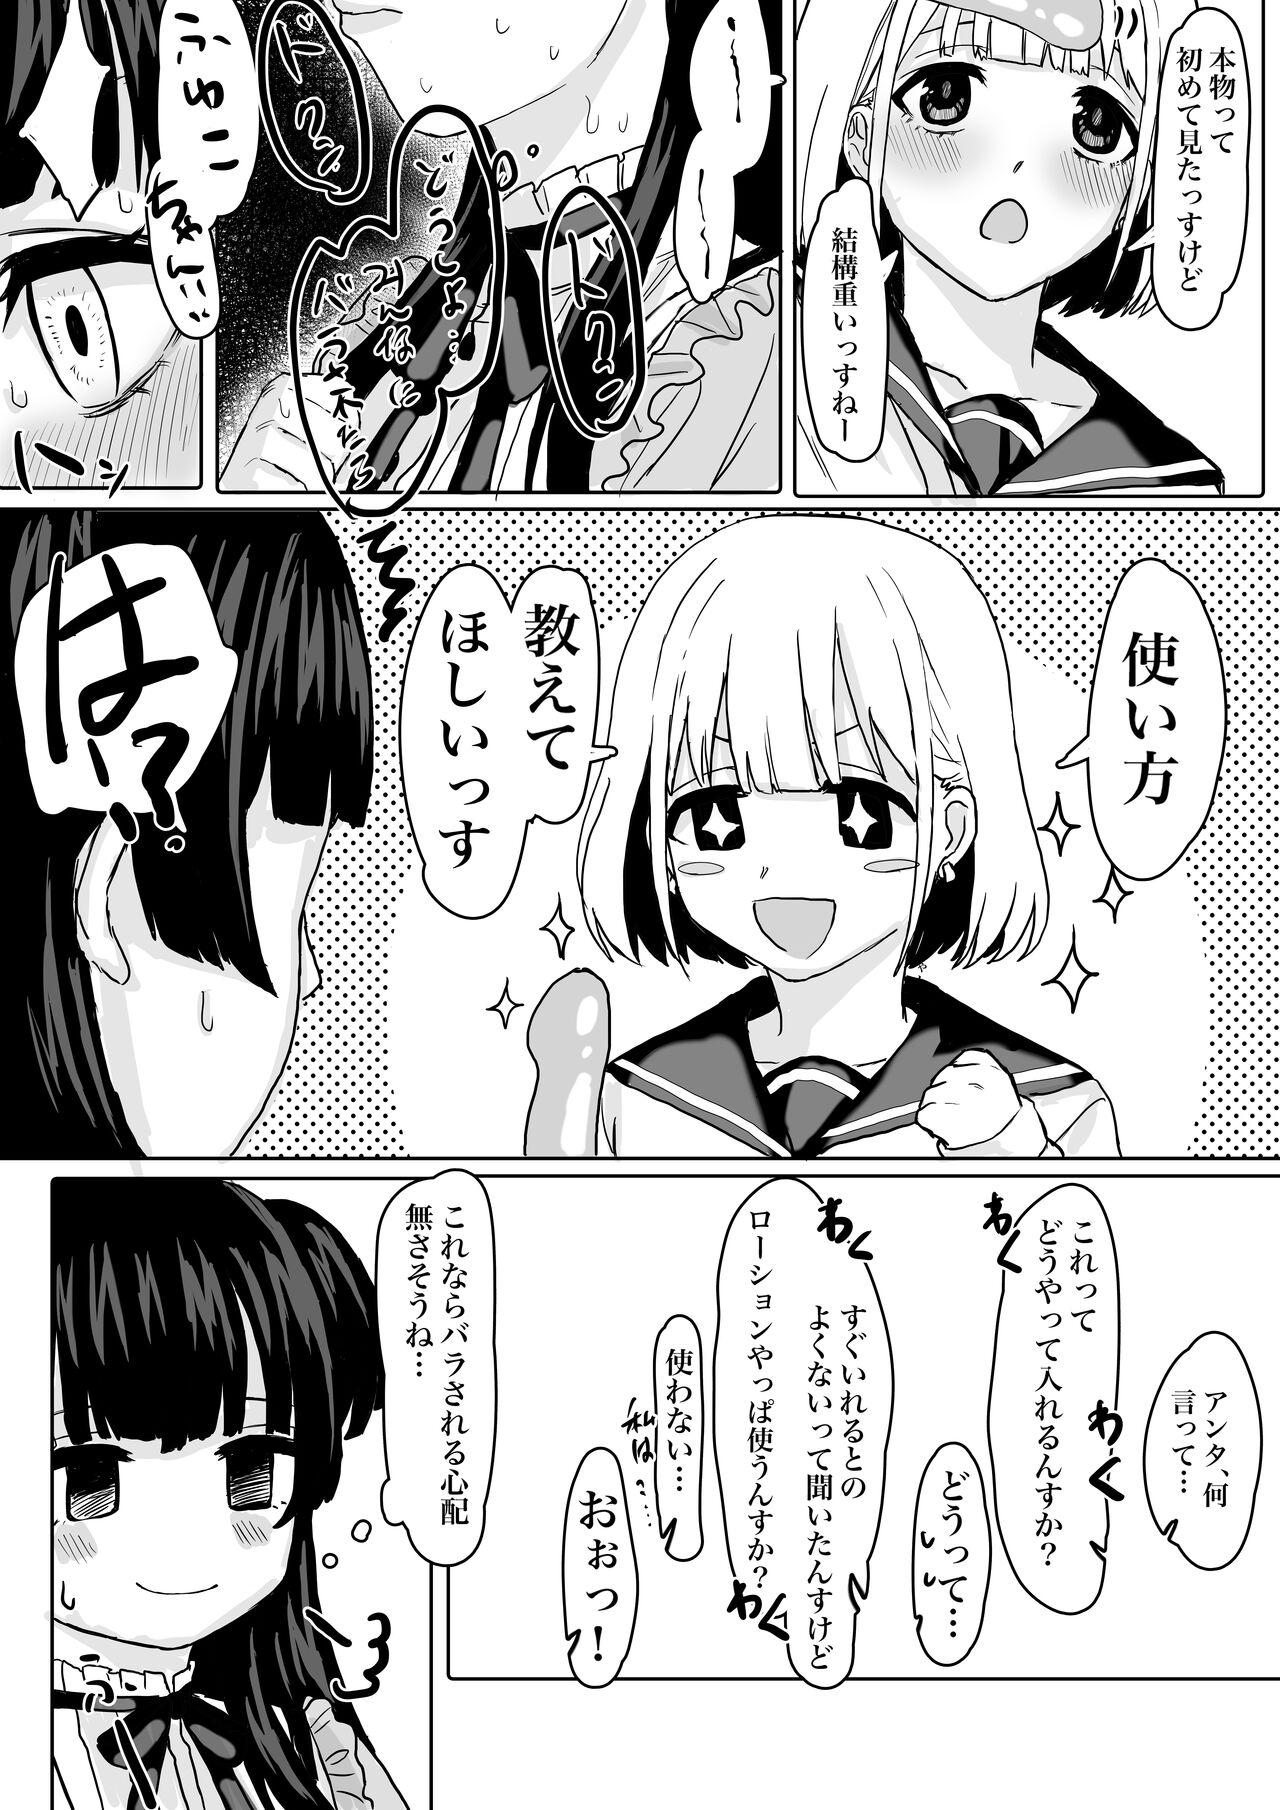 Glamour 「教えてほしいっす！」ふゆあさ百合 - The idolmaster Spanking - Page 4